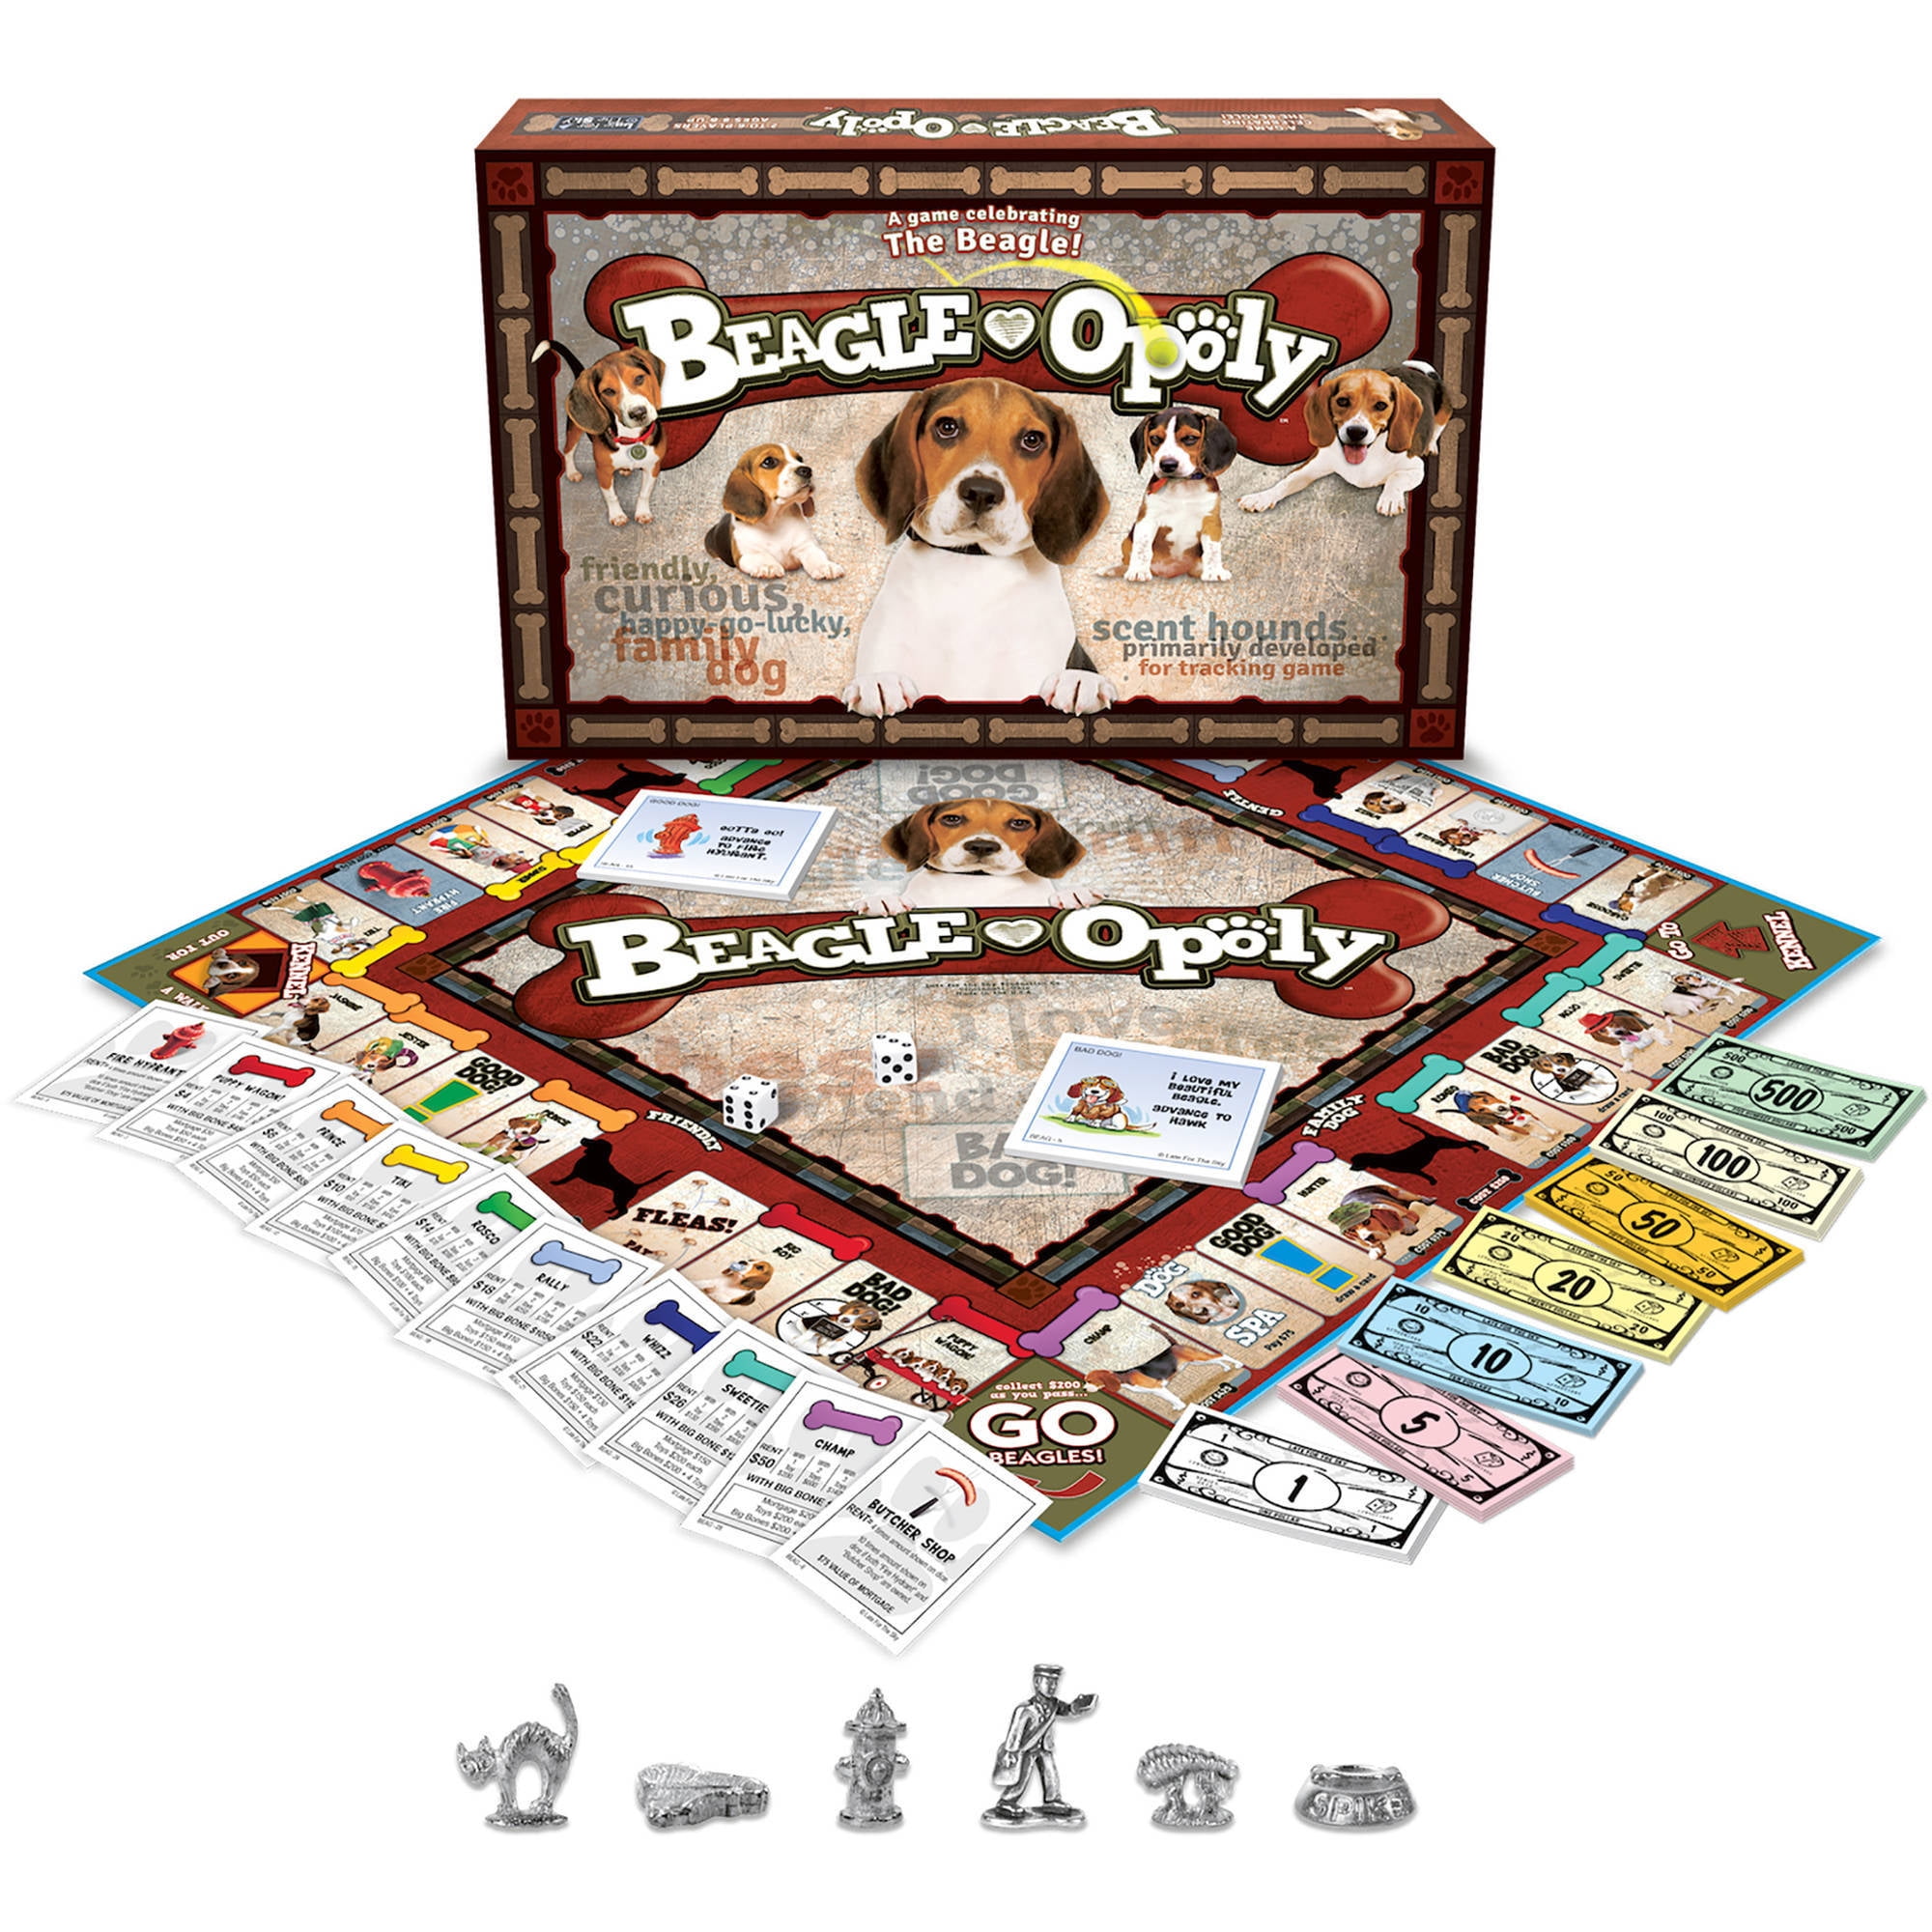 Late for The Sky Breed-opoly Board Game Lfs1139 Breed Beagle for sale online 